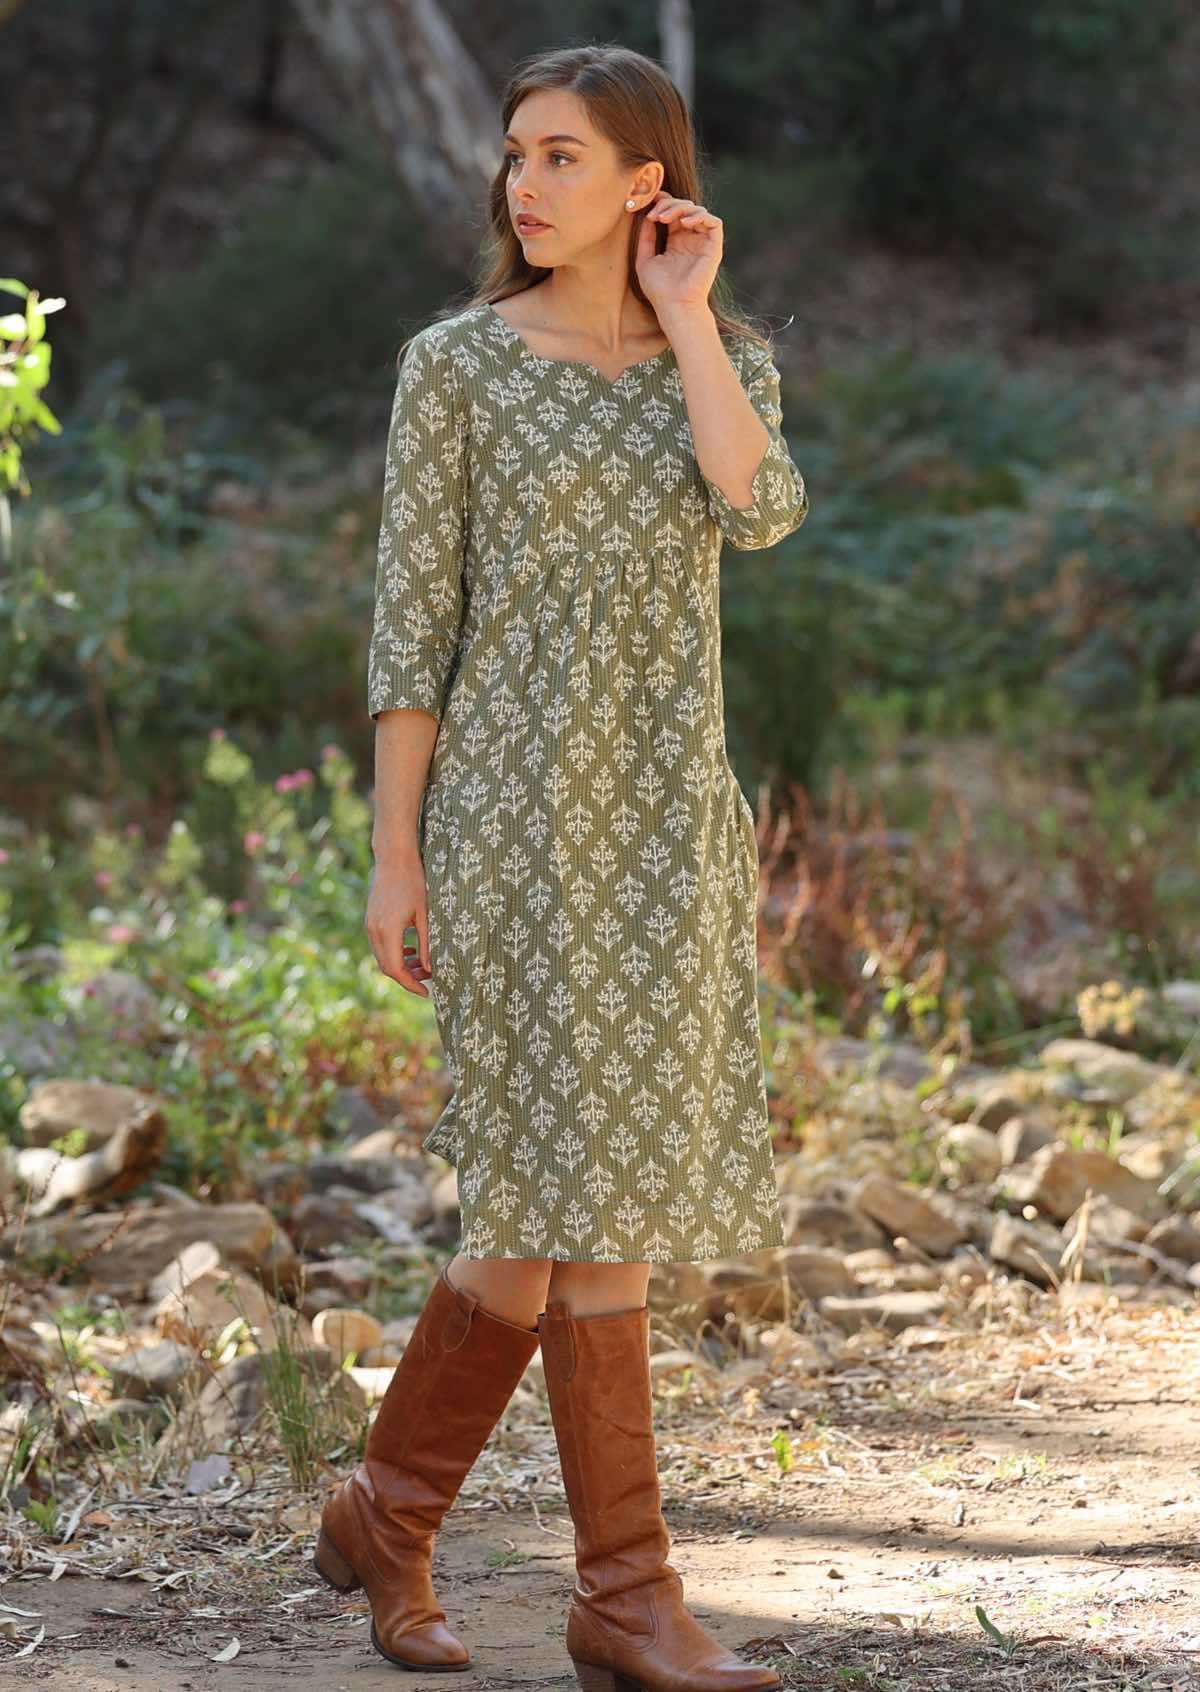 Cotton dress with round neckline with cutout in the centre and 3/4 sleeves